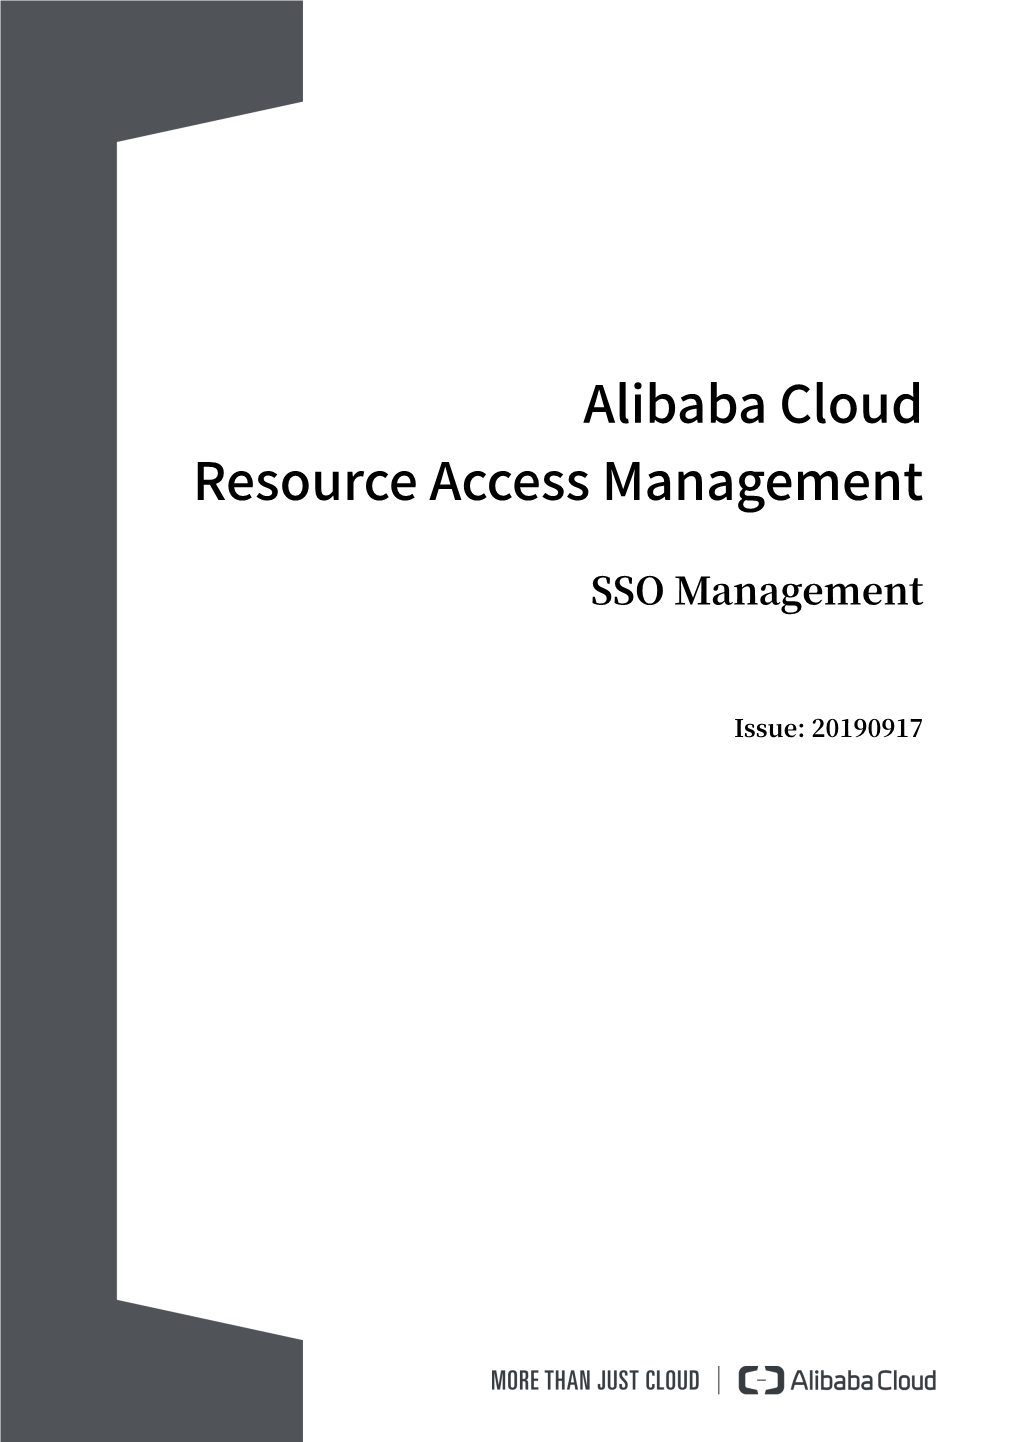 Alibaba Cloud Resource Access Management